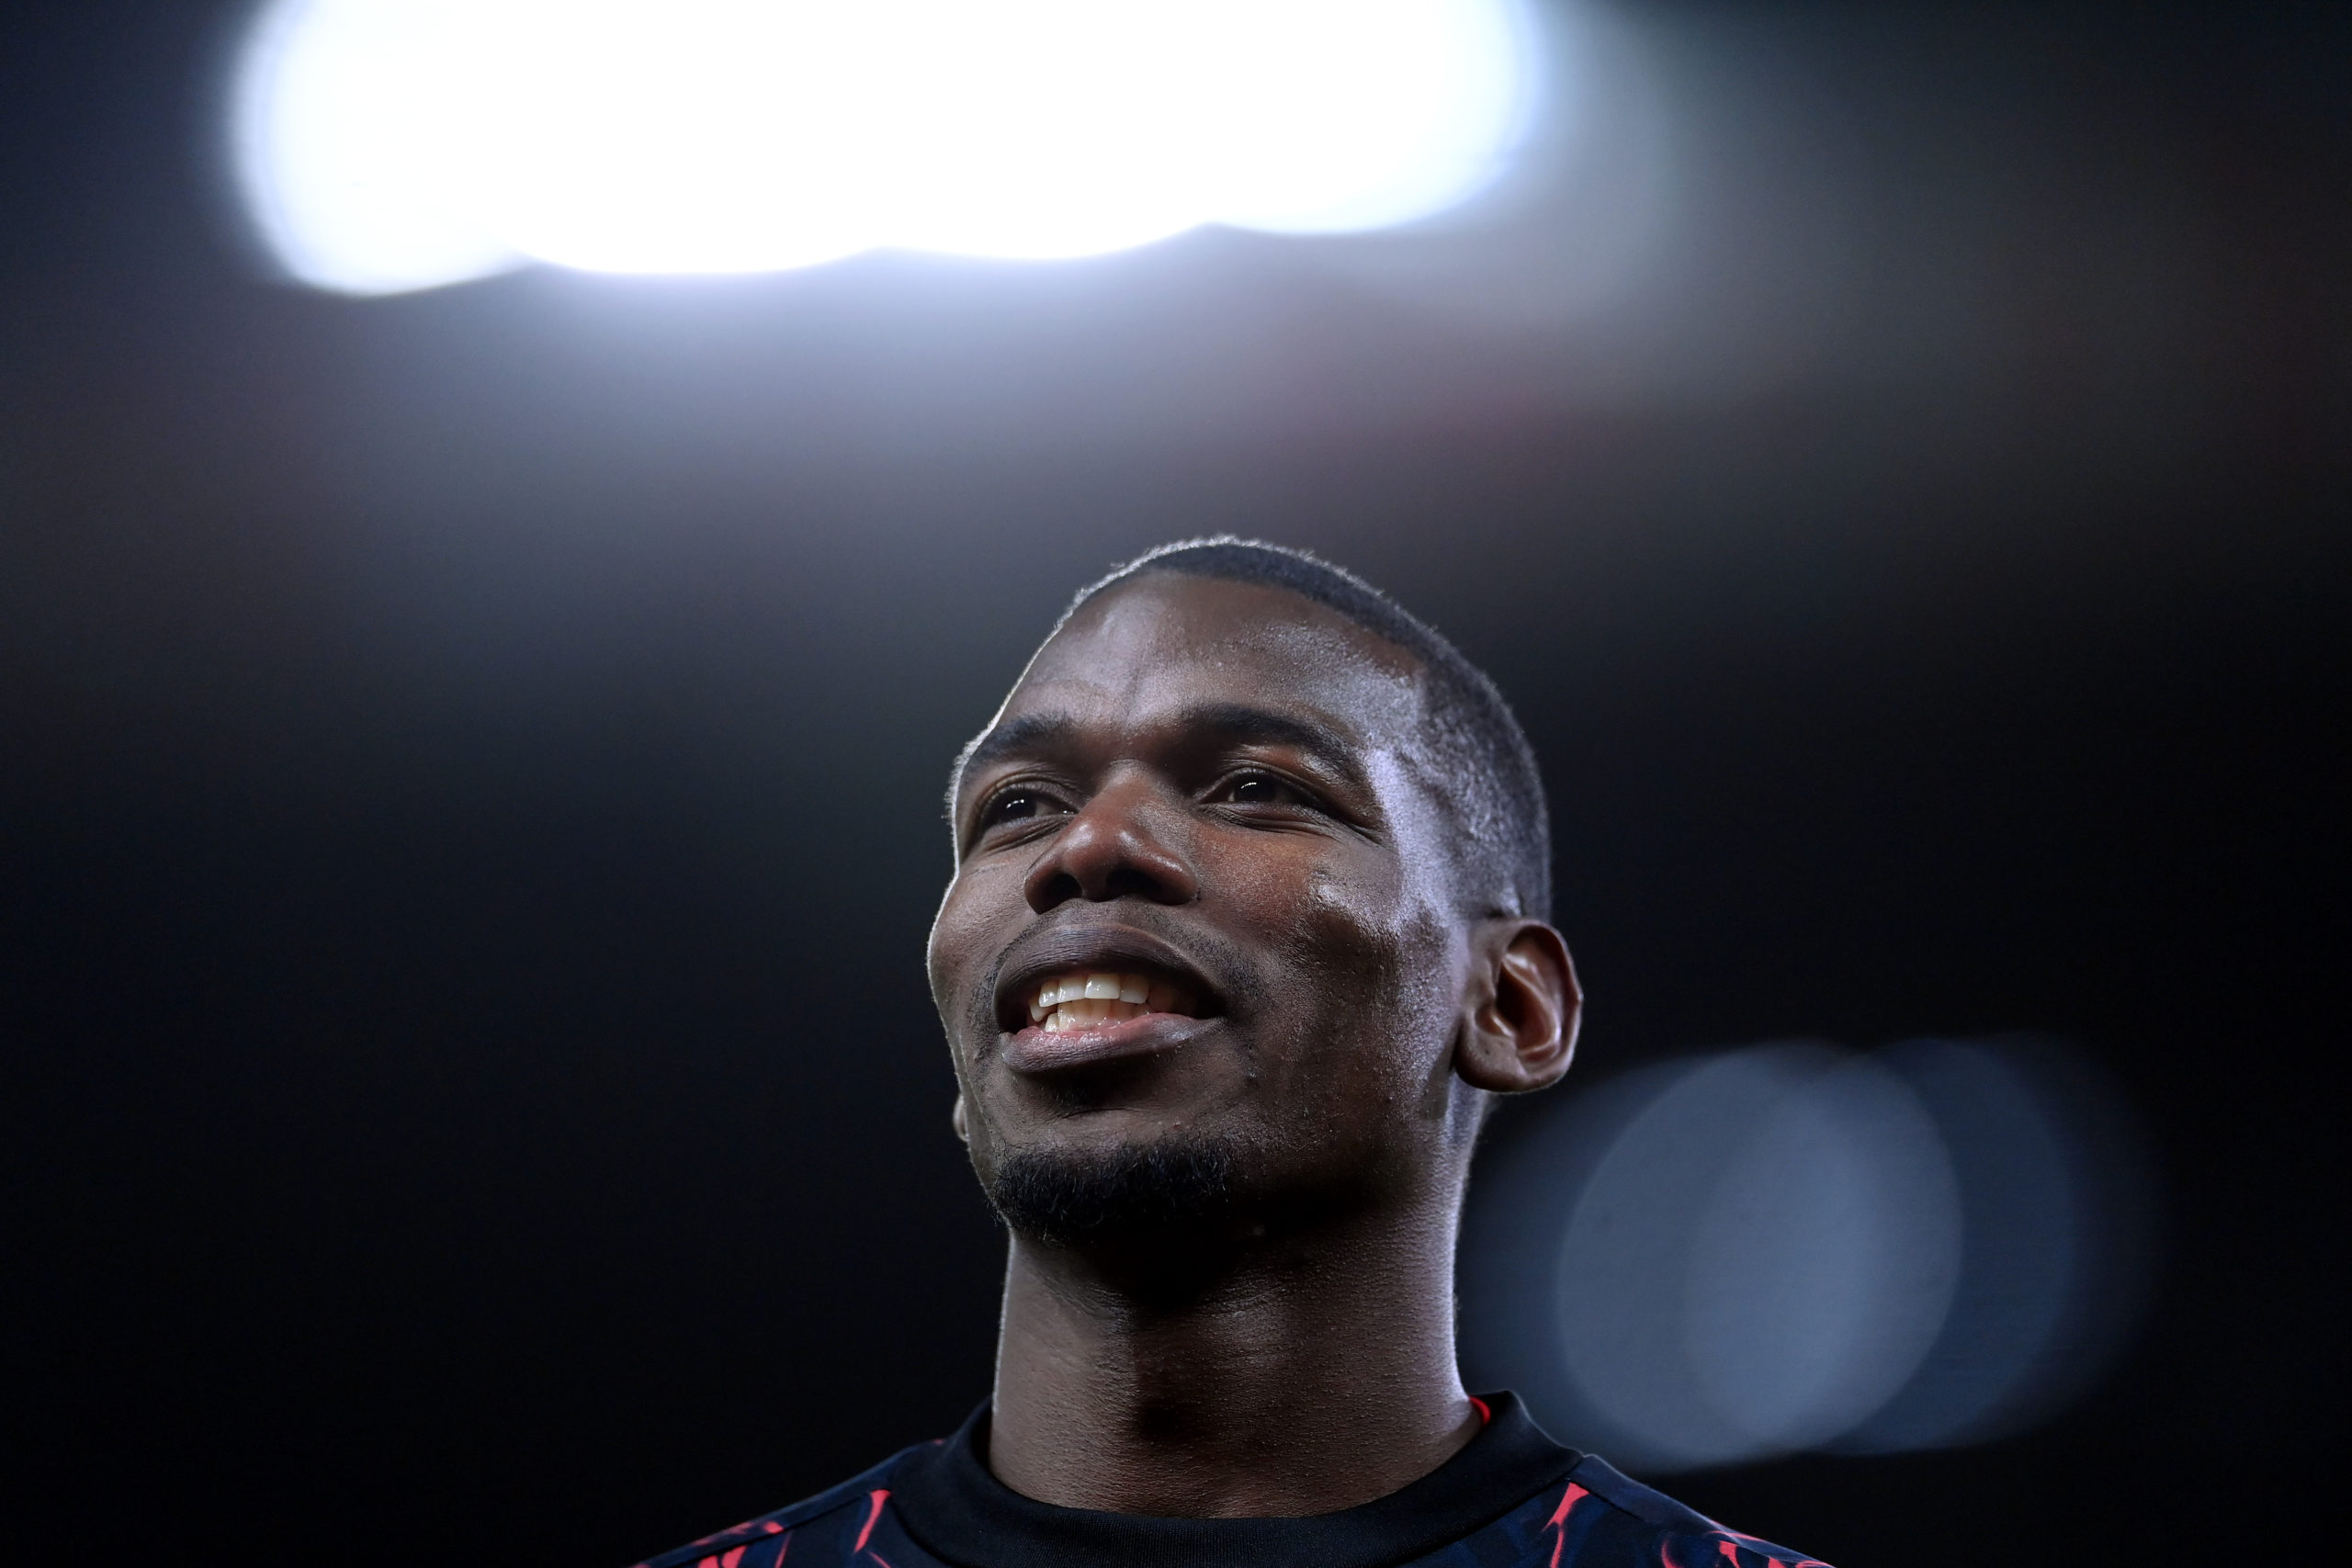 Paul Pogba lauded after 'class act' after giving his shirt to young fan